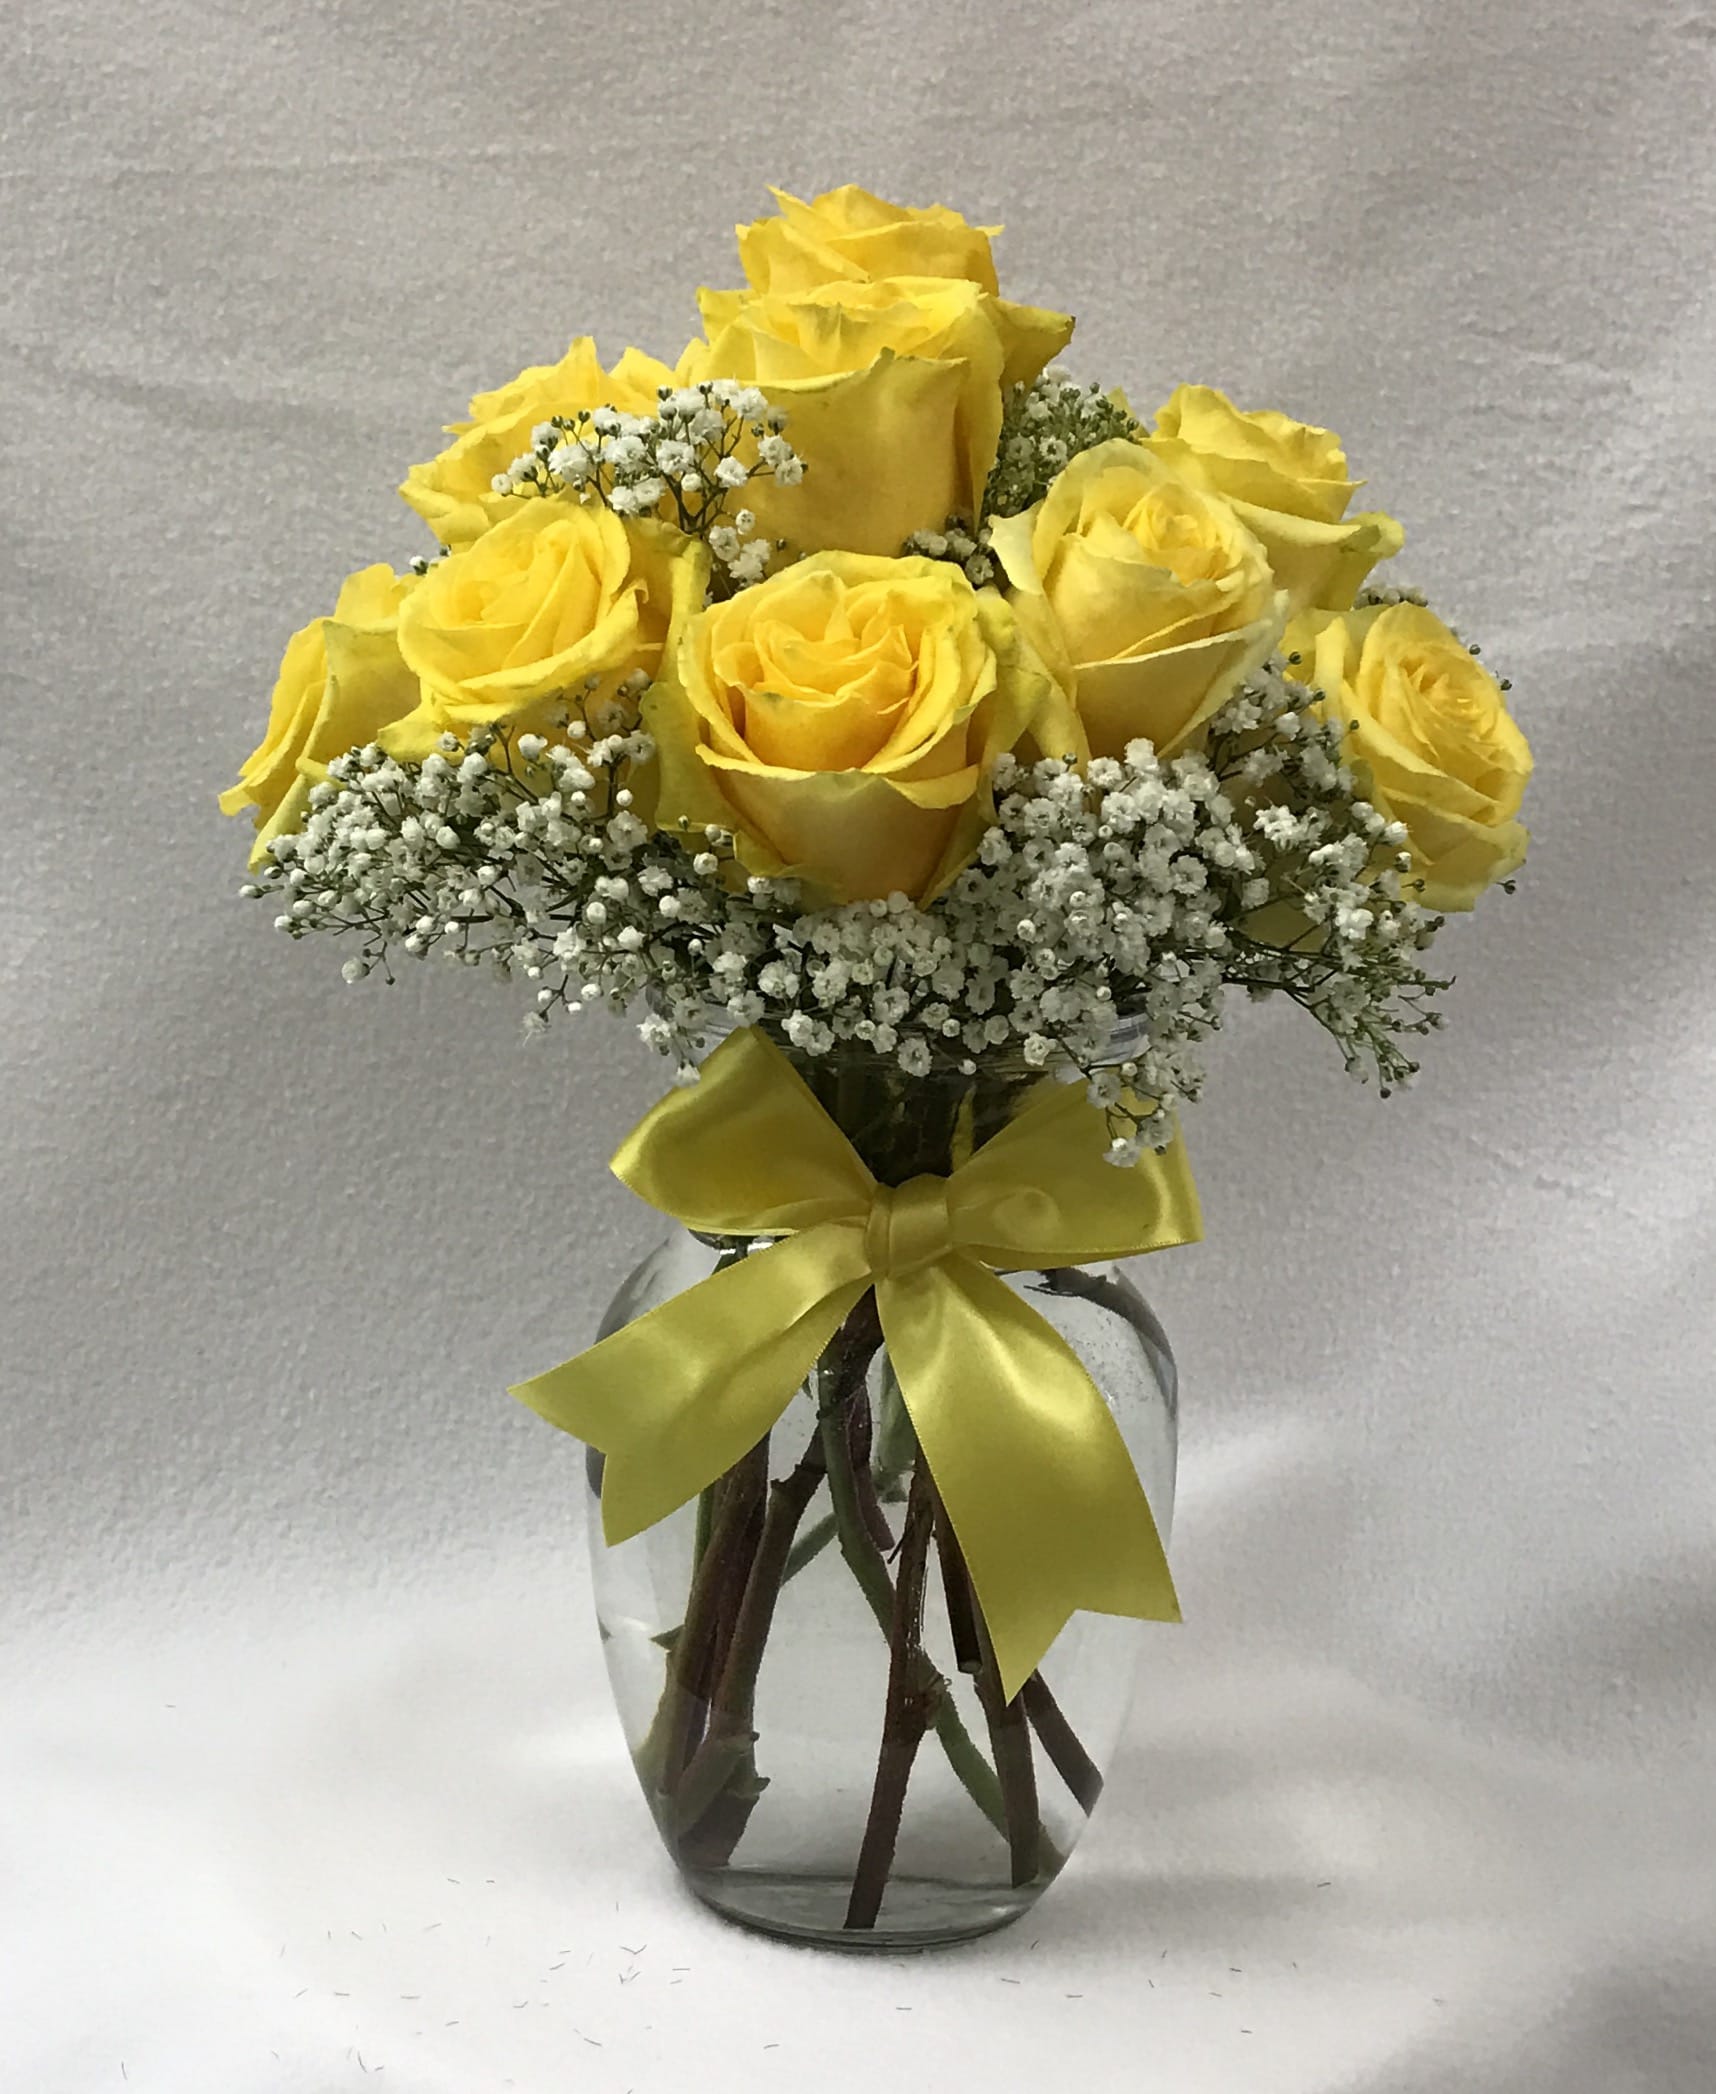 Golden Glow Rose Bouquet - A dozen yellow roses with baby's breath. Deluxe:  18 roses Premium:  24 roses ****YOU MAY ALSO PURCHASE THIS BOUQUET IN COLORS OTHER THAN RED, CALL US FOR COLOR AVAILABILITY.